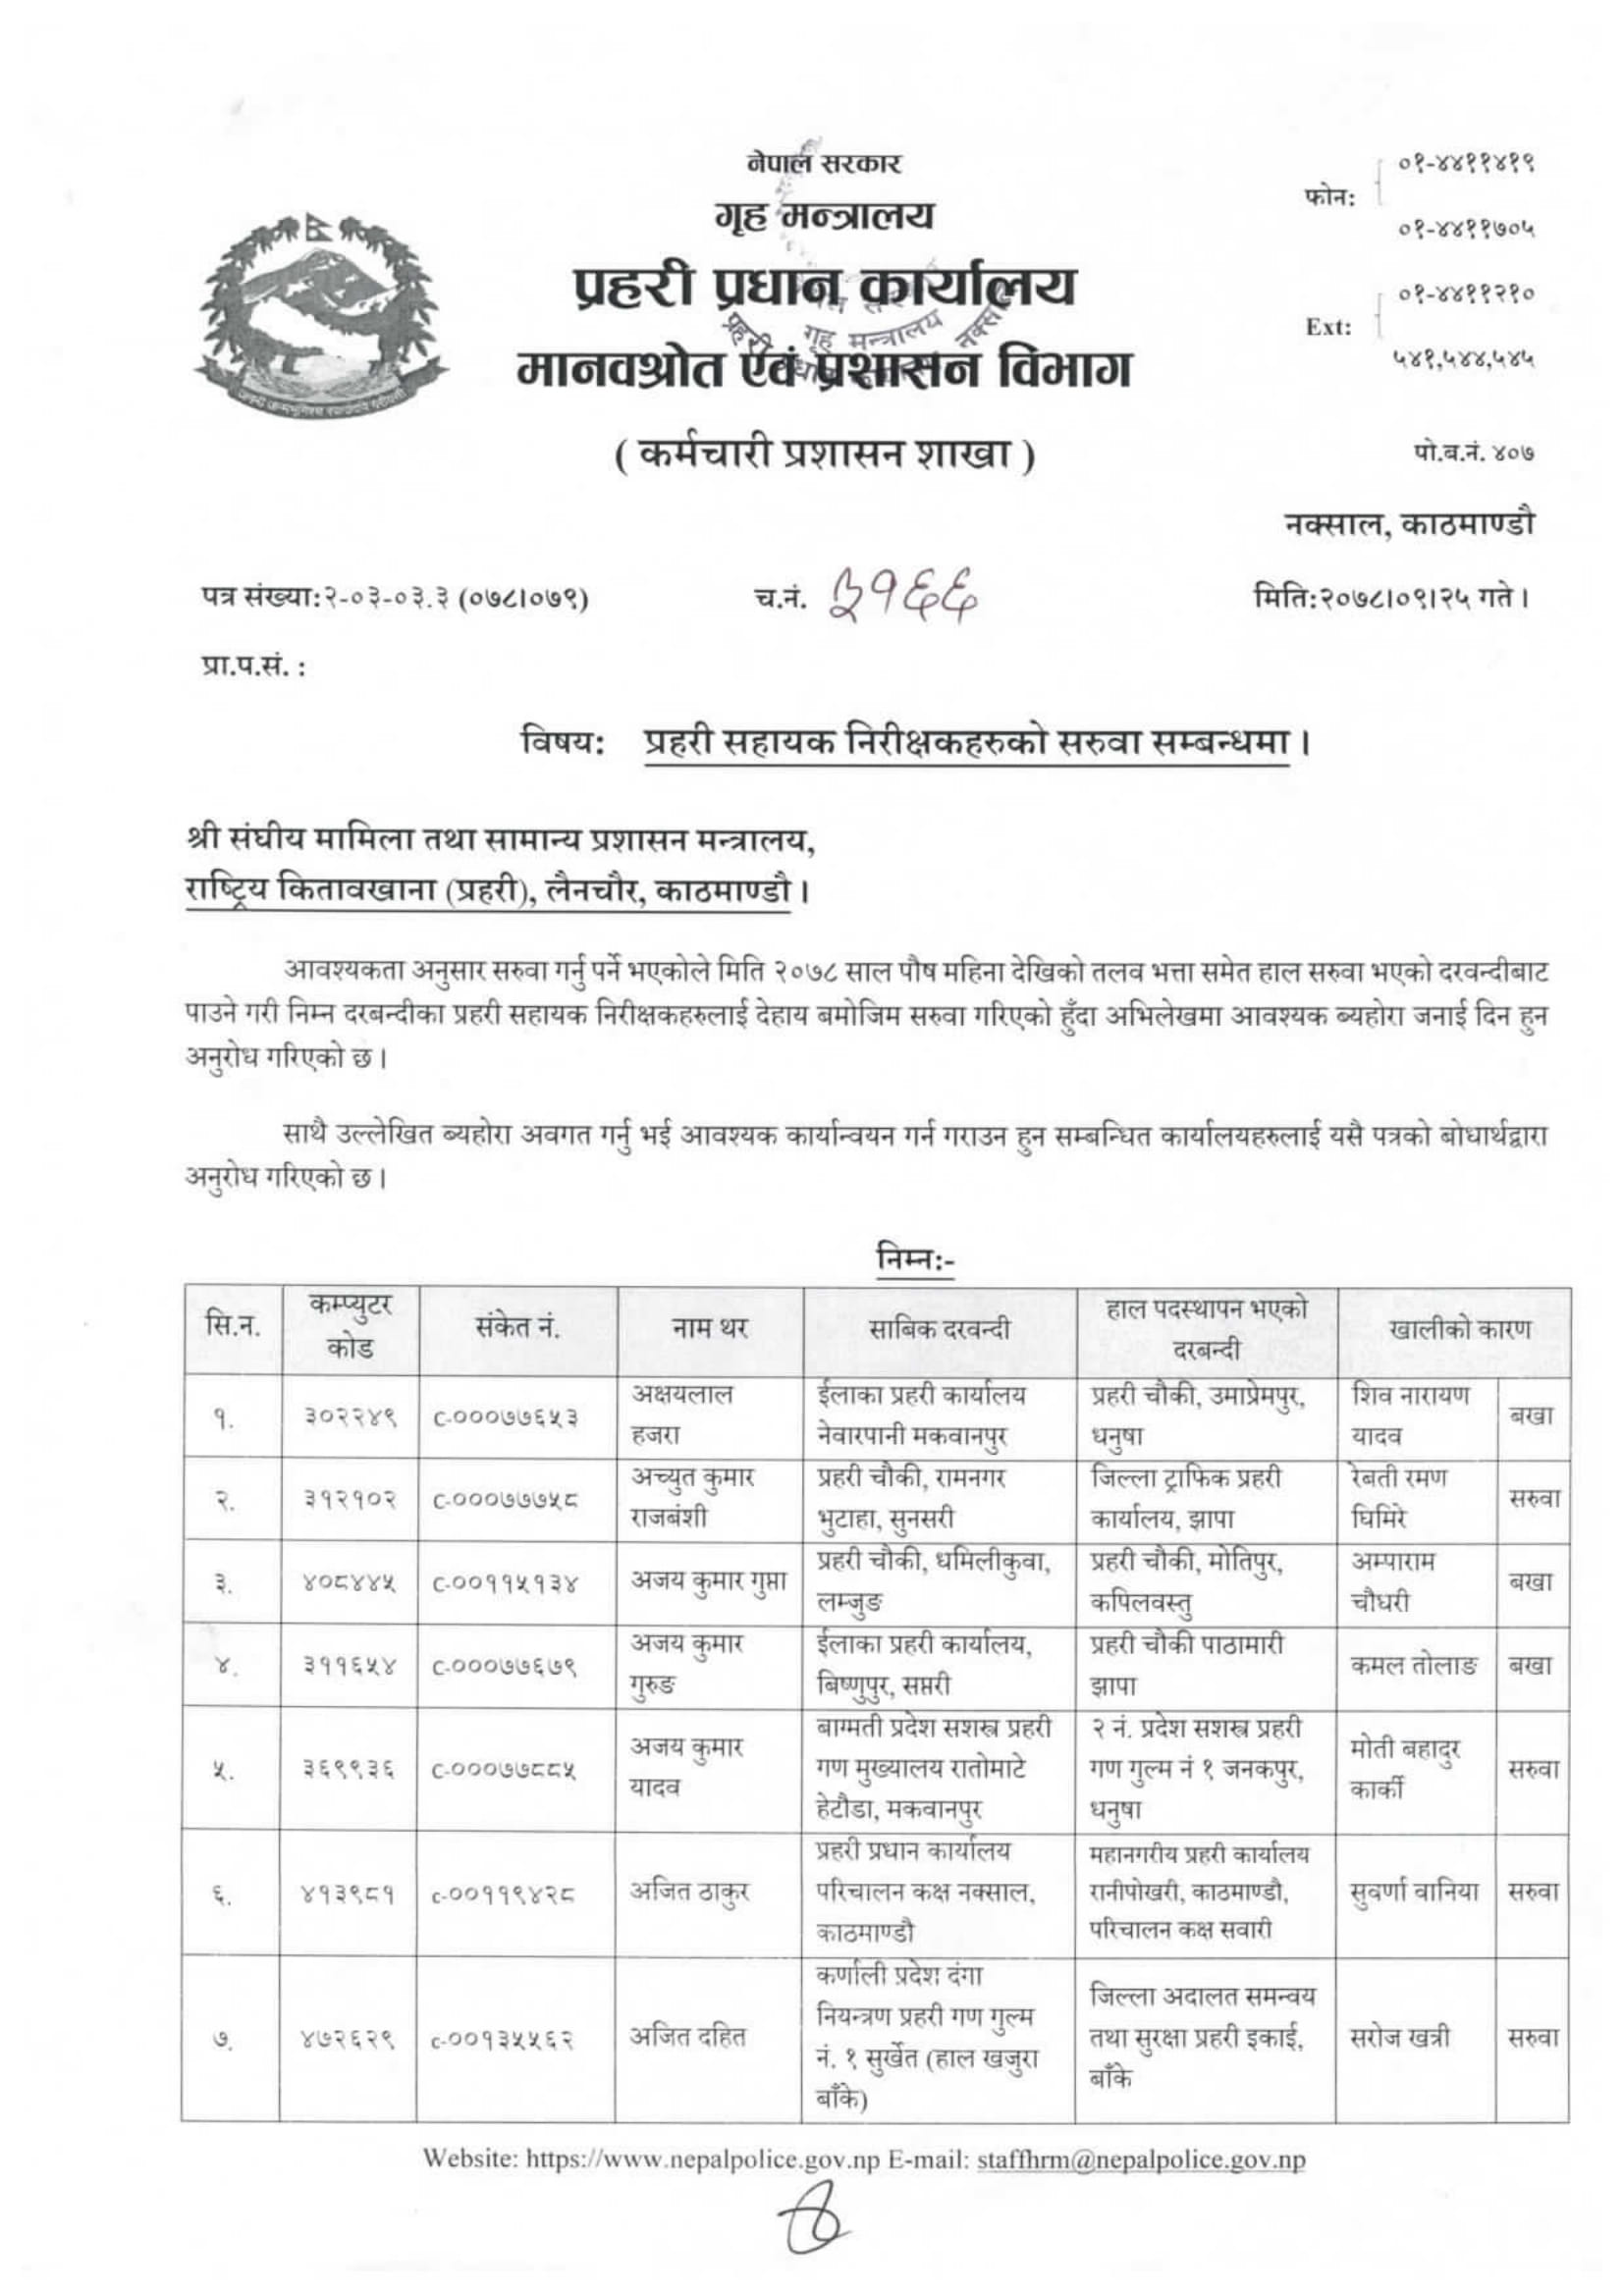 Nepal Police Transfer List of Assistant Sub Inspector (ASI)